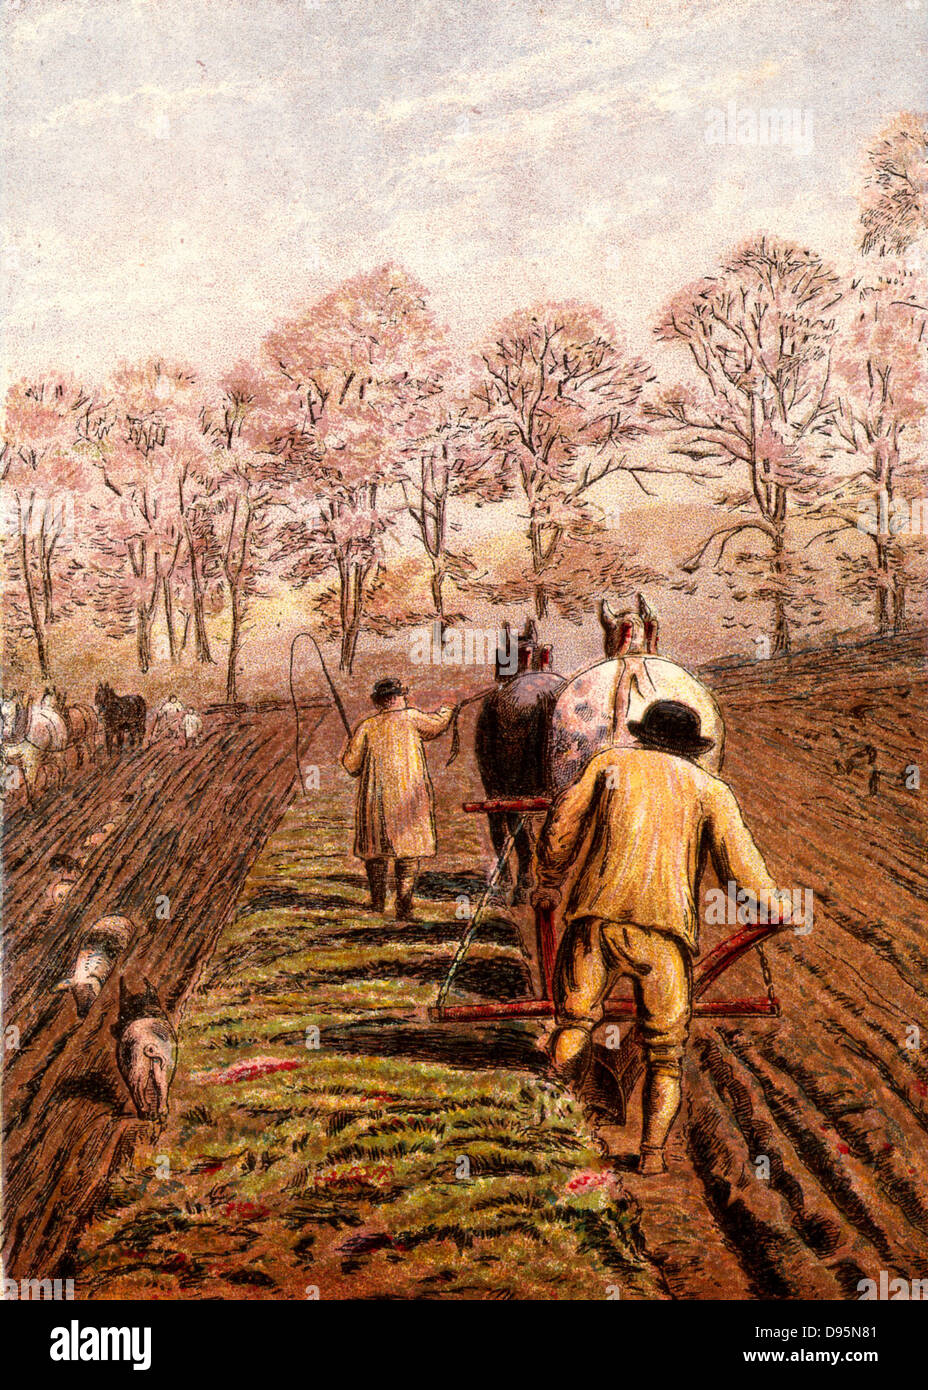 Winter ploughing with horses. The man leading the horse is wearing a smock, a traditional agricultural worker's garment.   Kronheim chromolithograph from 'Pictures from Nature' by Mary Howitt (London, 1869). Stock Photo